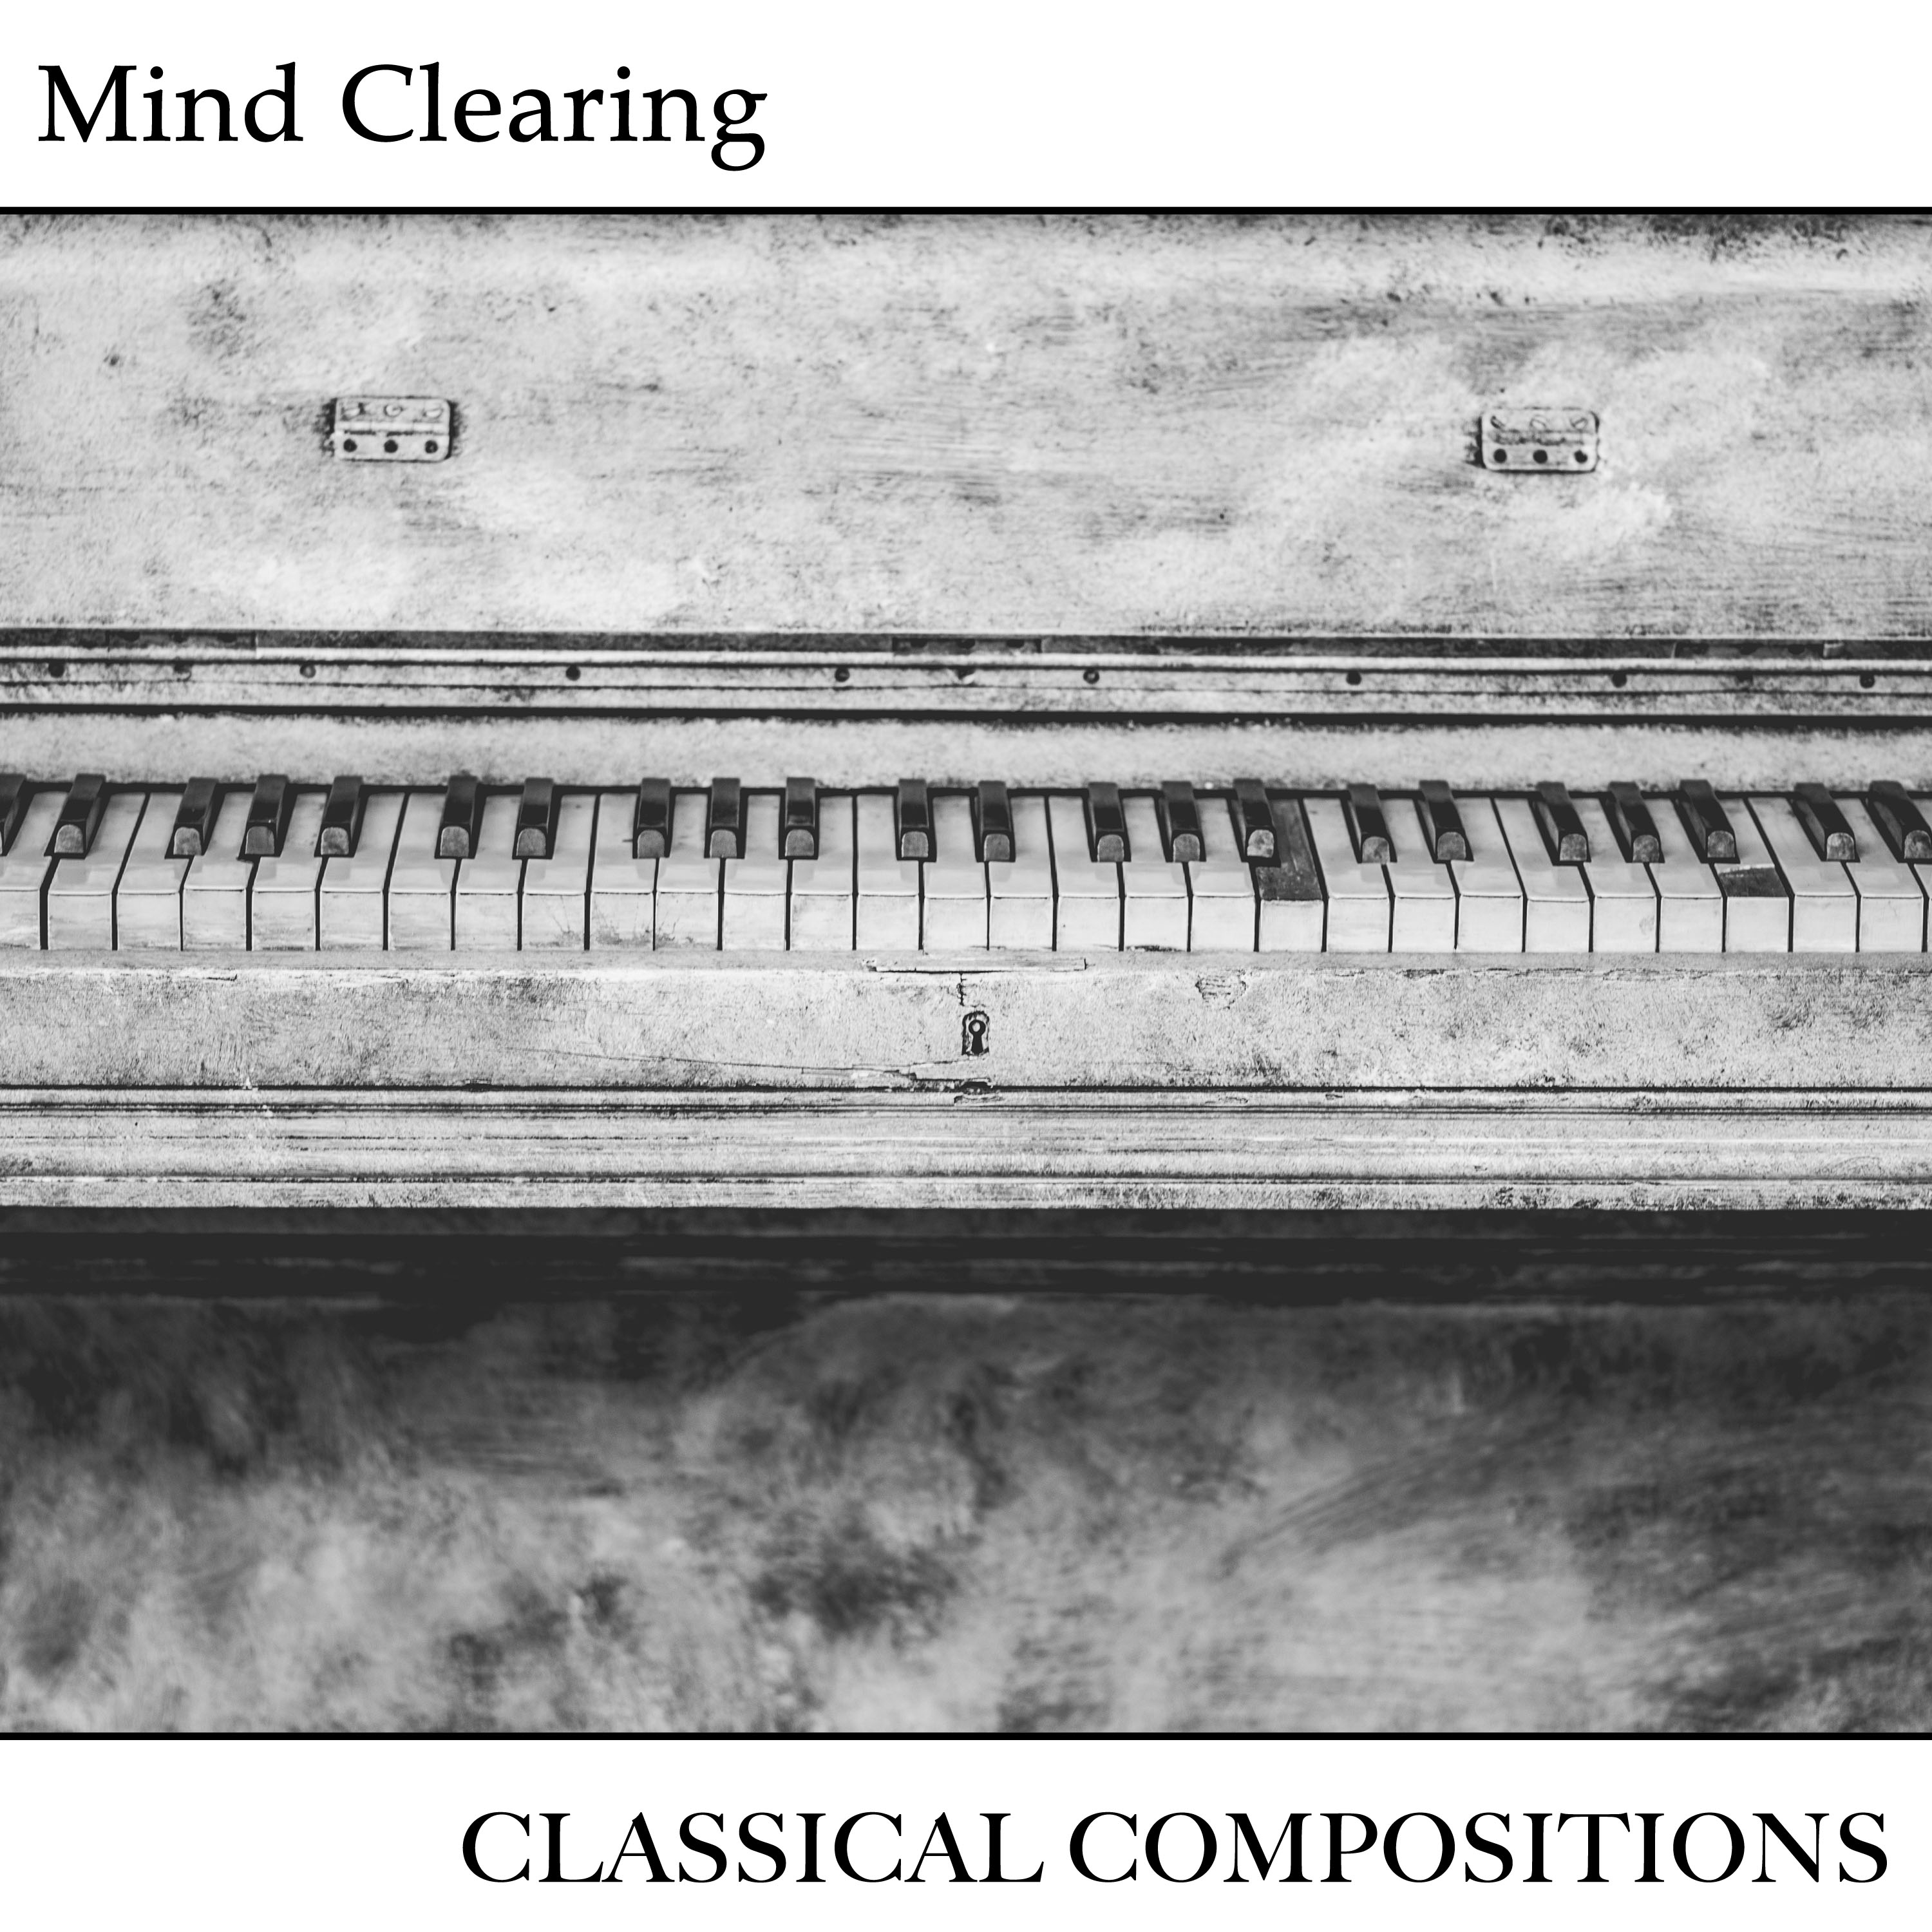 13 Mind Clearing Classical Compositions to Learn